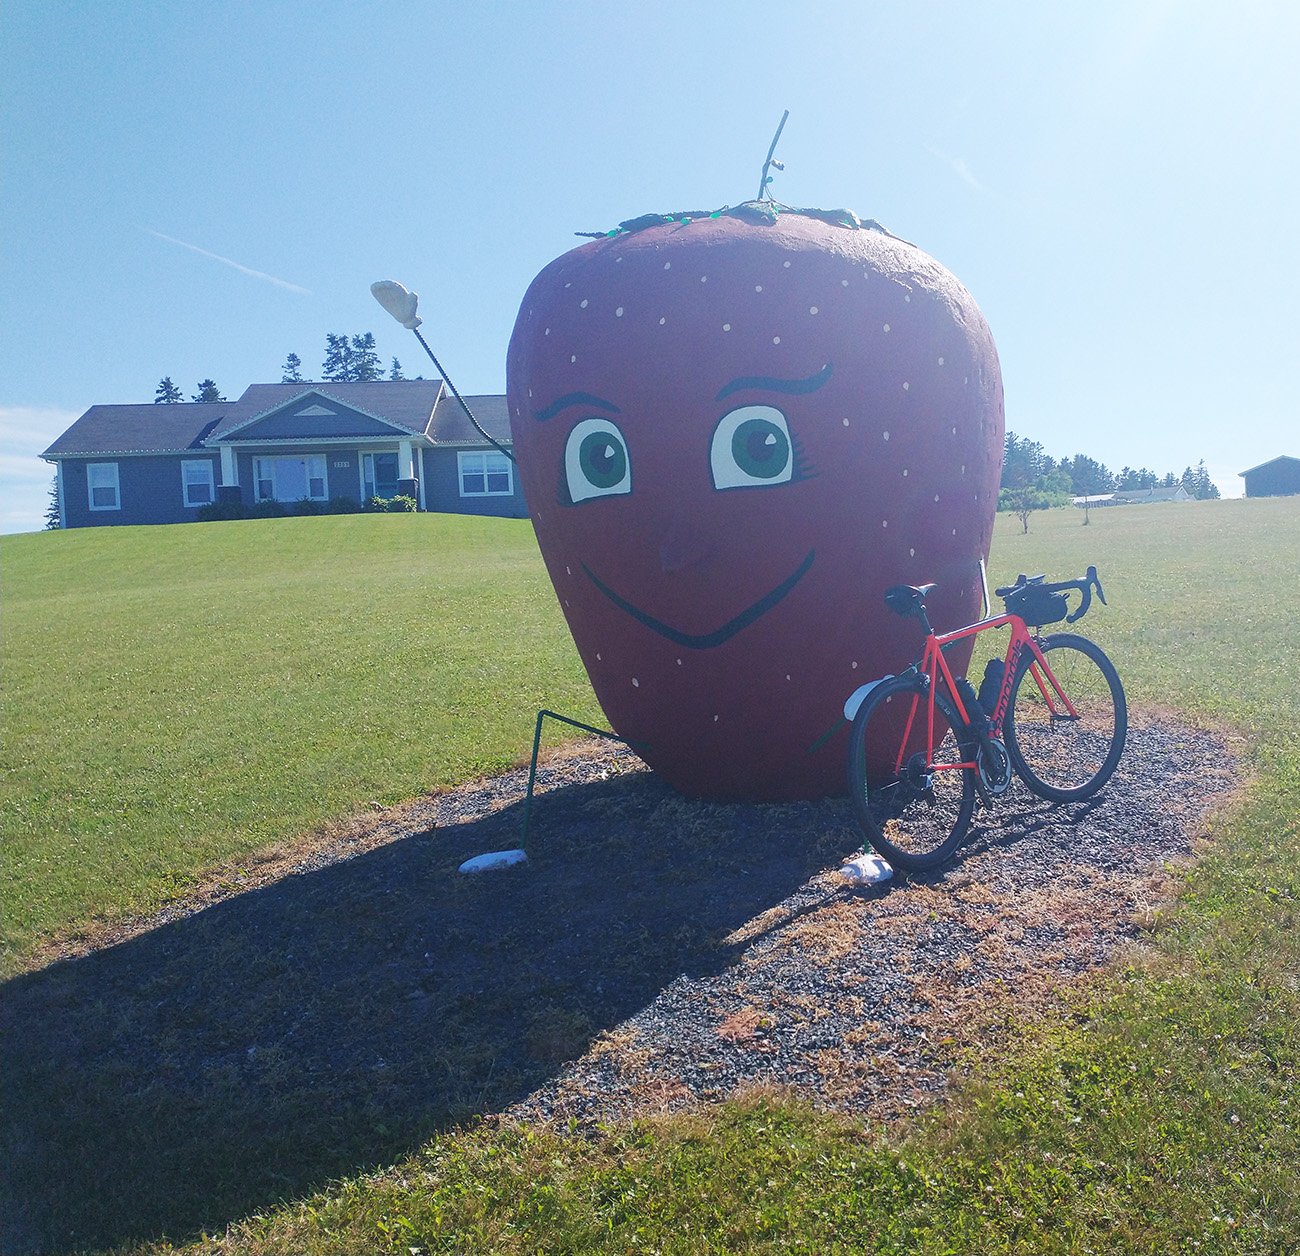 So apparently there's a "largest Strawberry" in North Carolina. But this one I randomly stumbled on is so much better.